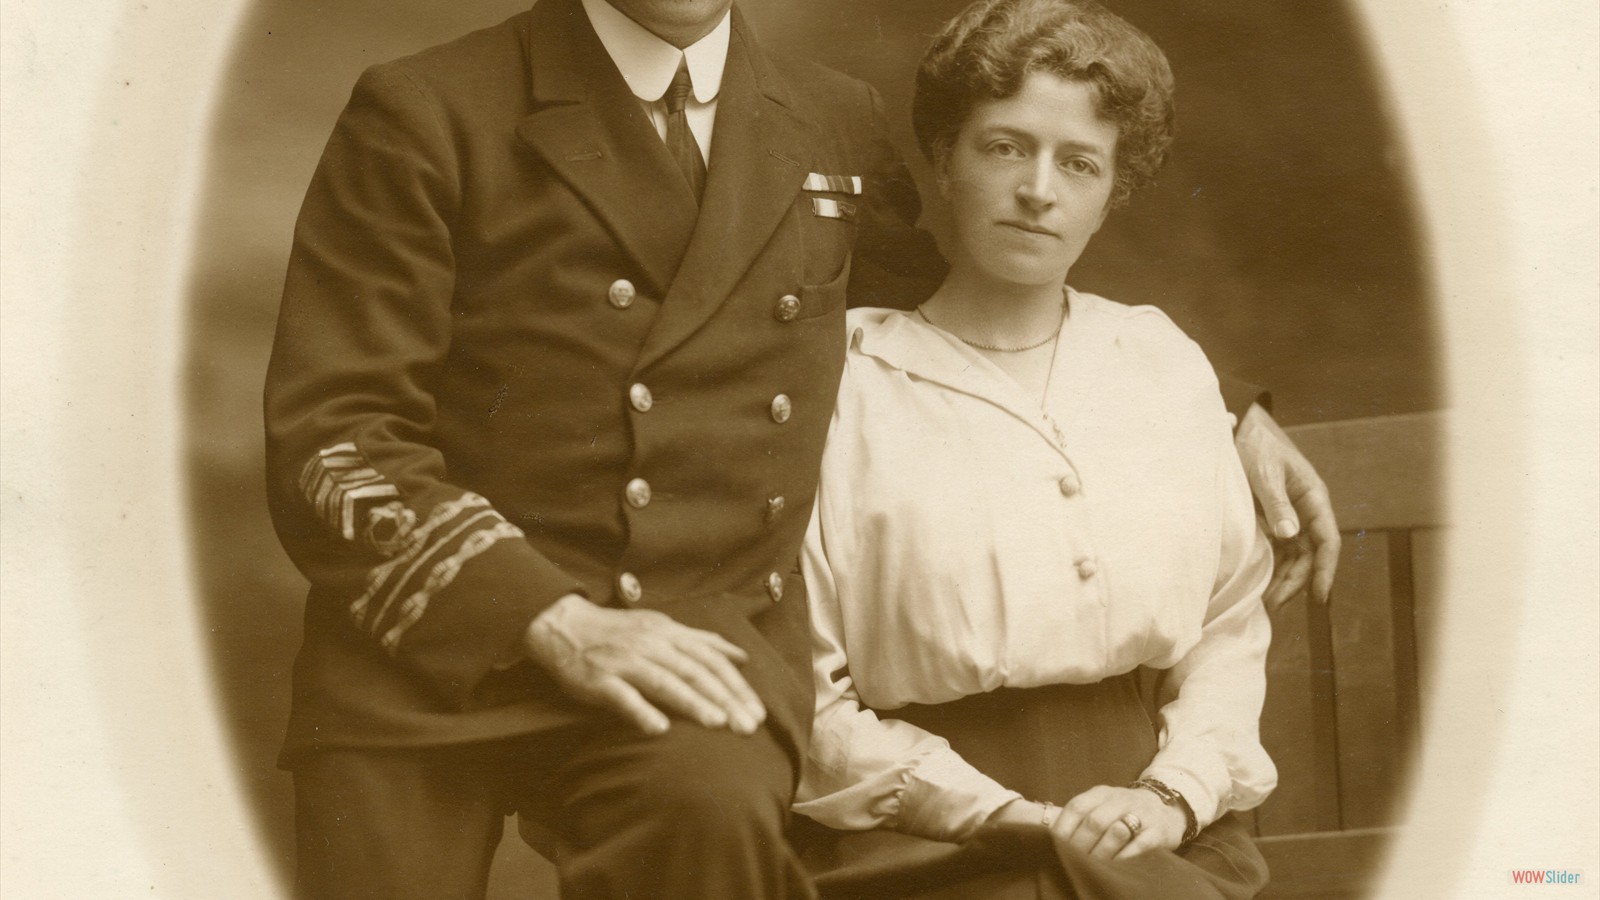 Captain Jack Randell and his wife Gertrude Elizabeth Lewis married in Cardiff, Wales, 1909